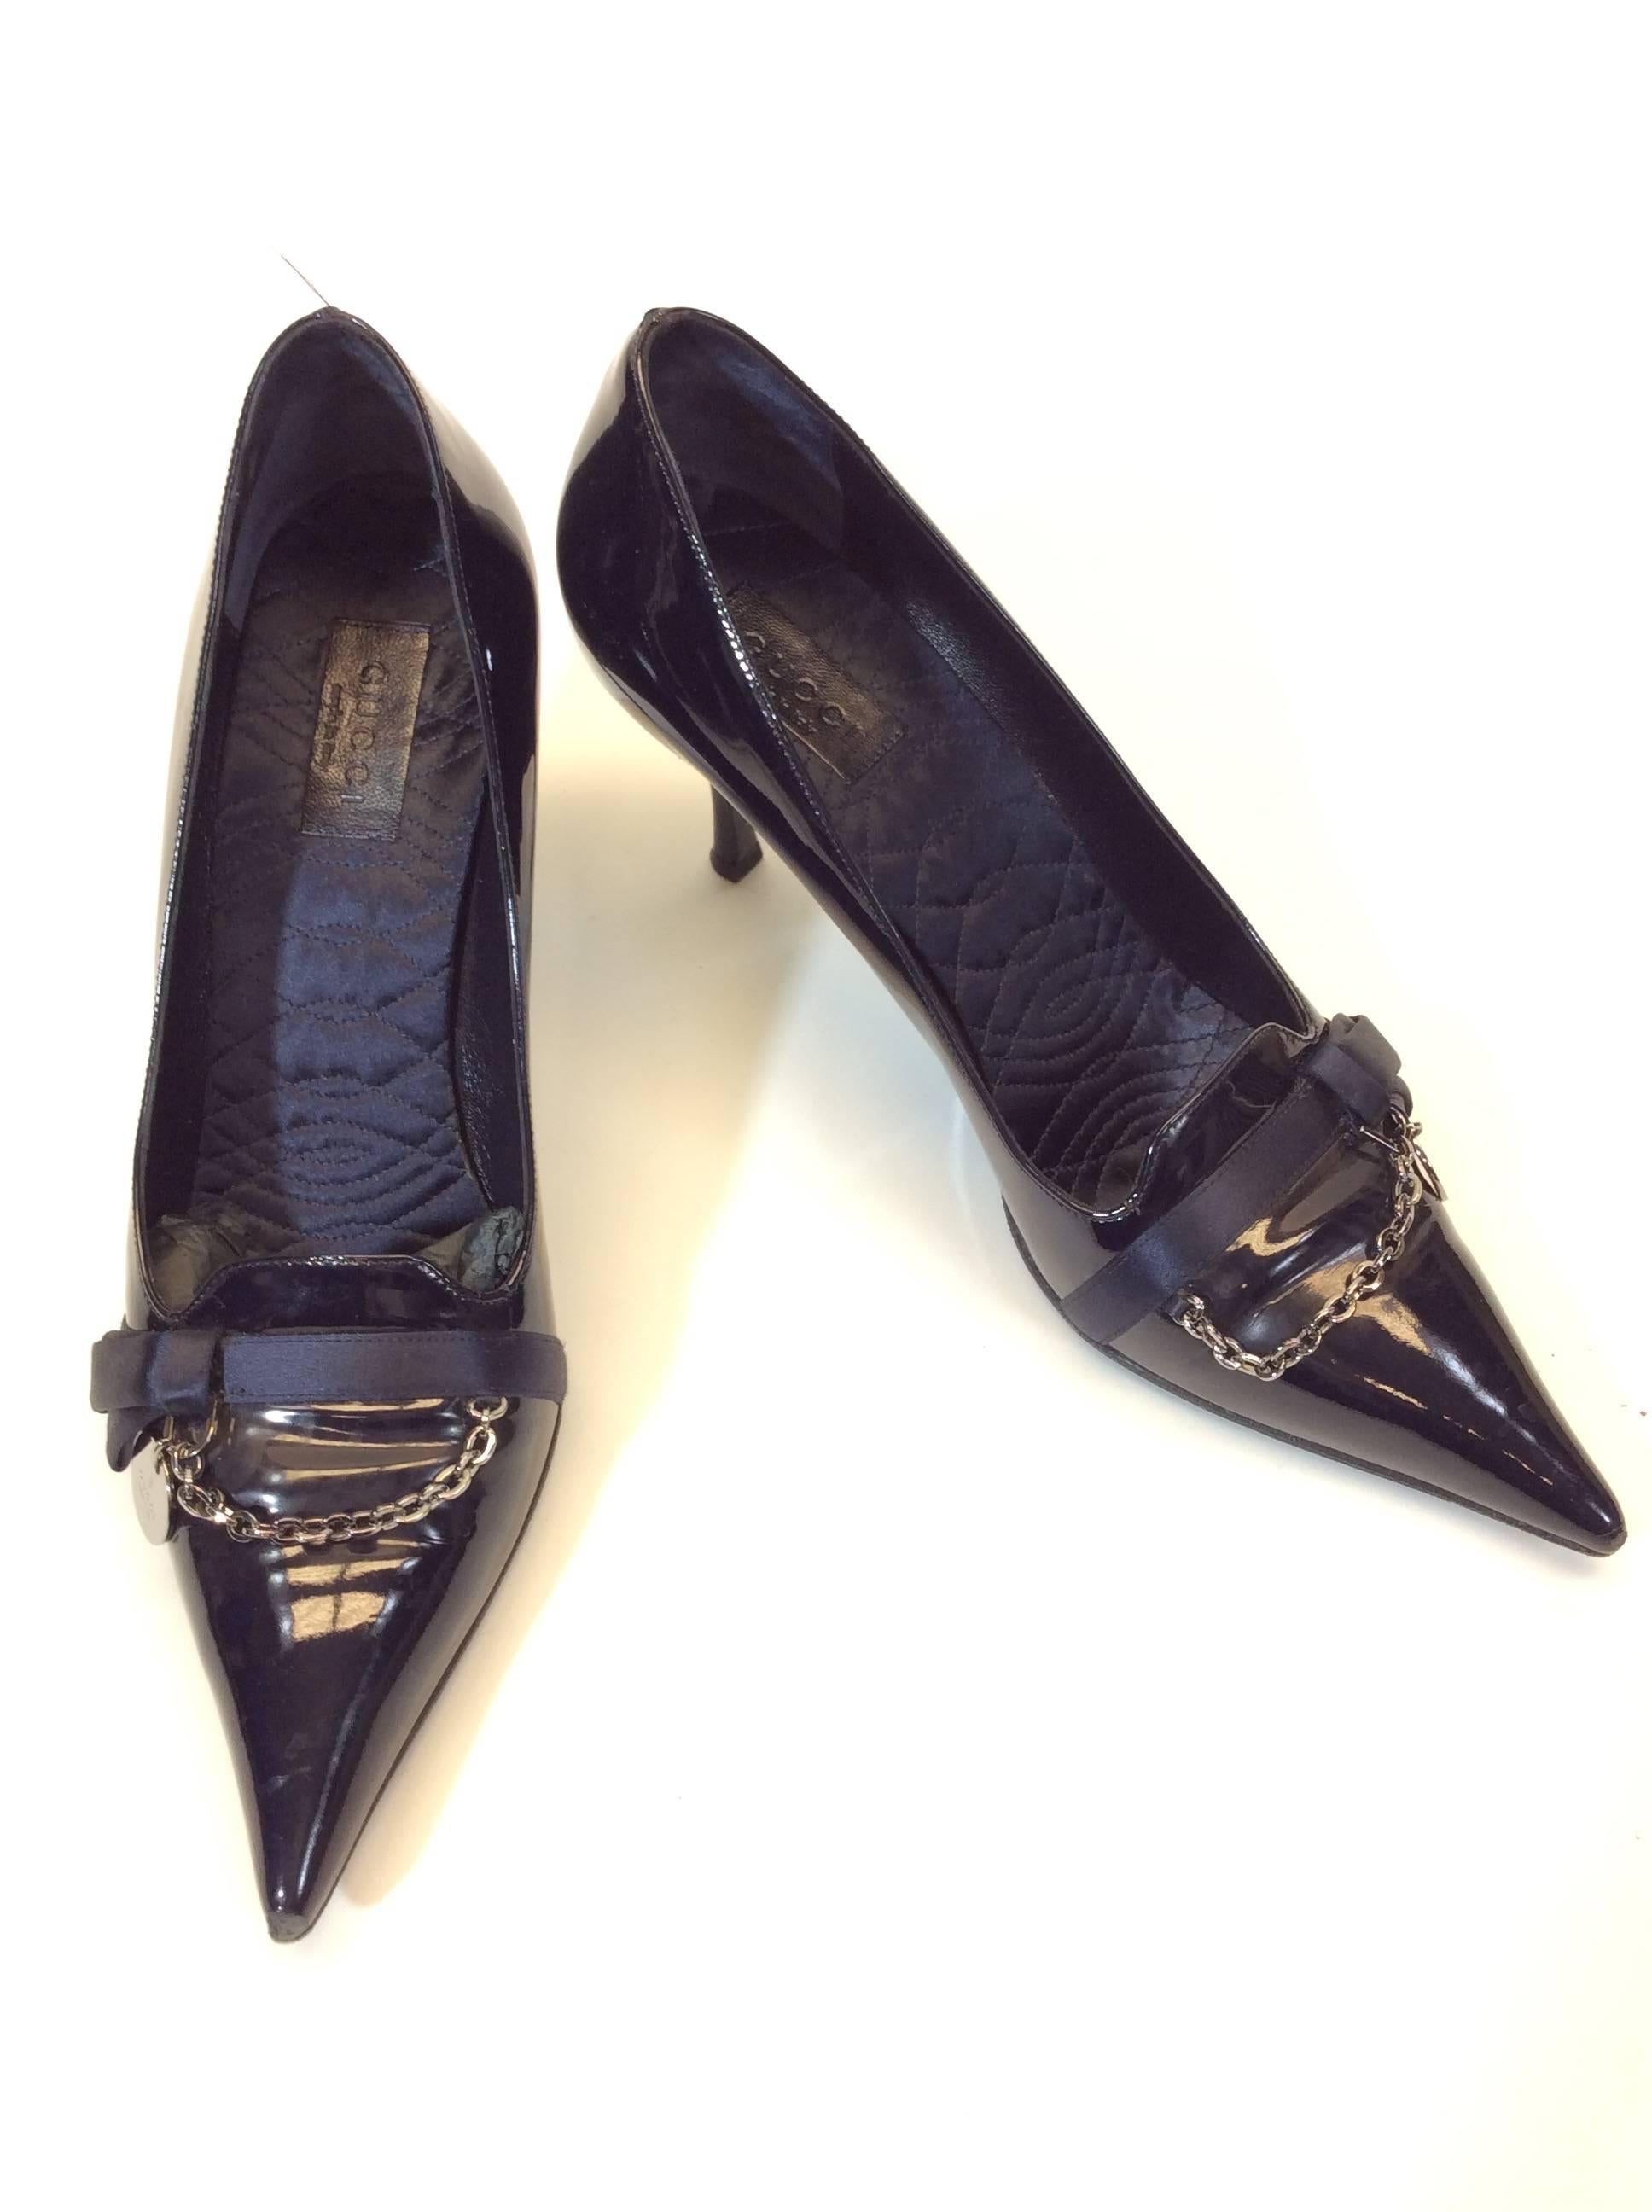 Gucci Navy Patent Leather
Silverstone Embellished Chain on Toe
Pointed Toe 
Quilted Silk Insole
Gucci Logo on Charm
3" Inch Sole 
3" Inch Heel
EU Size 39